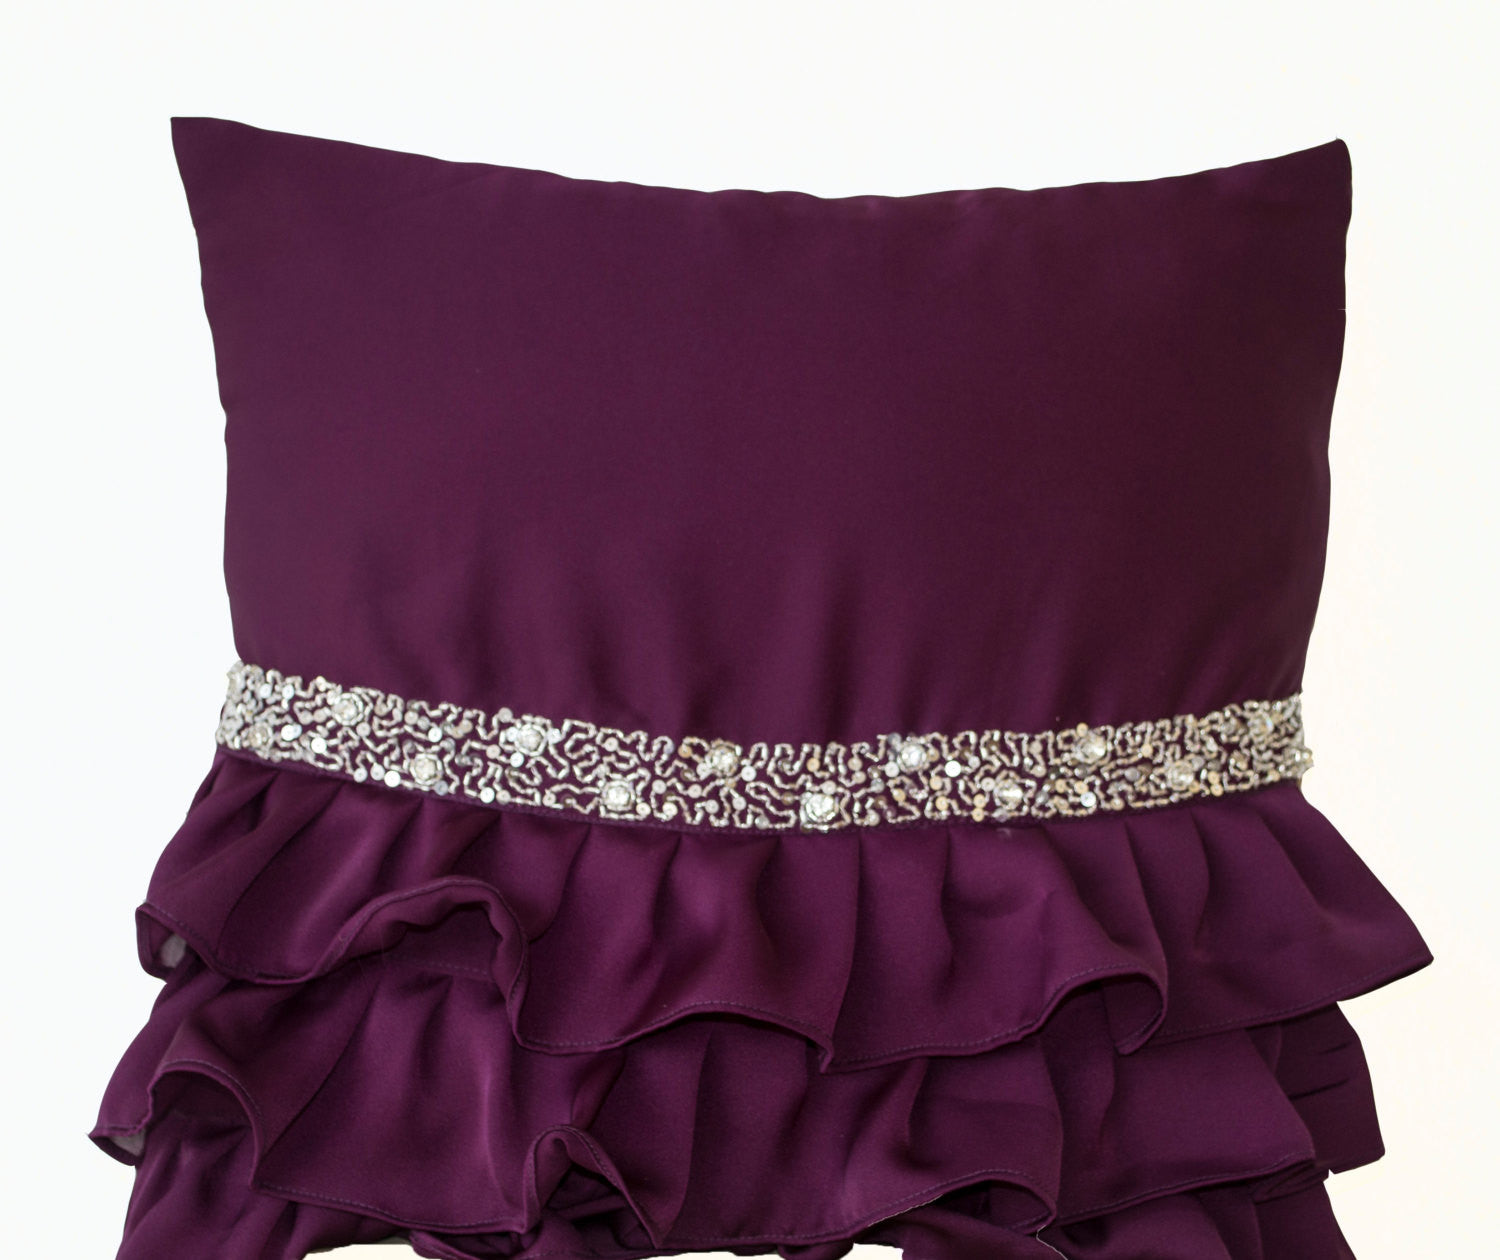 Handmade purple throw pillow with sequin and ruffles